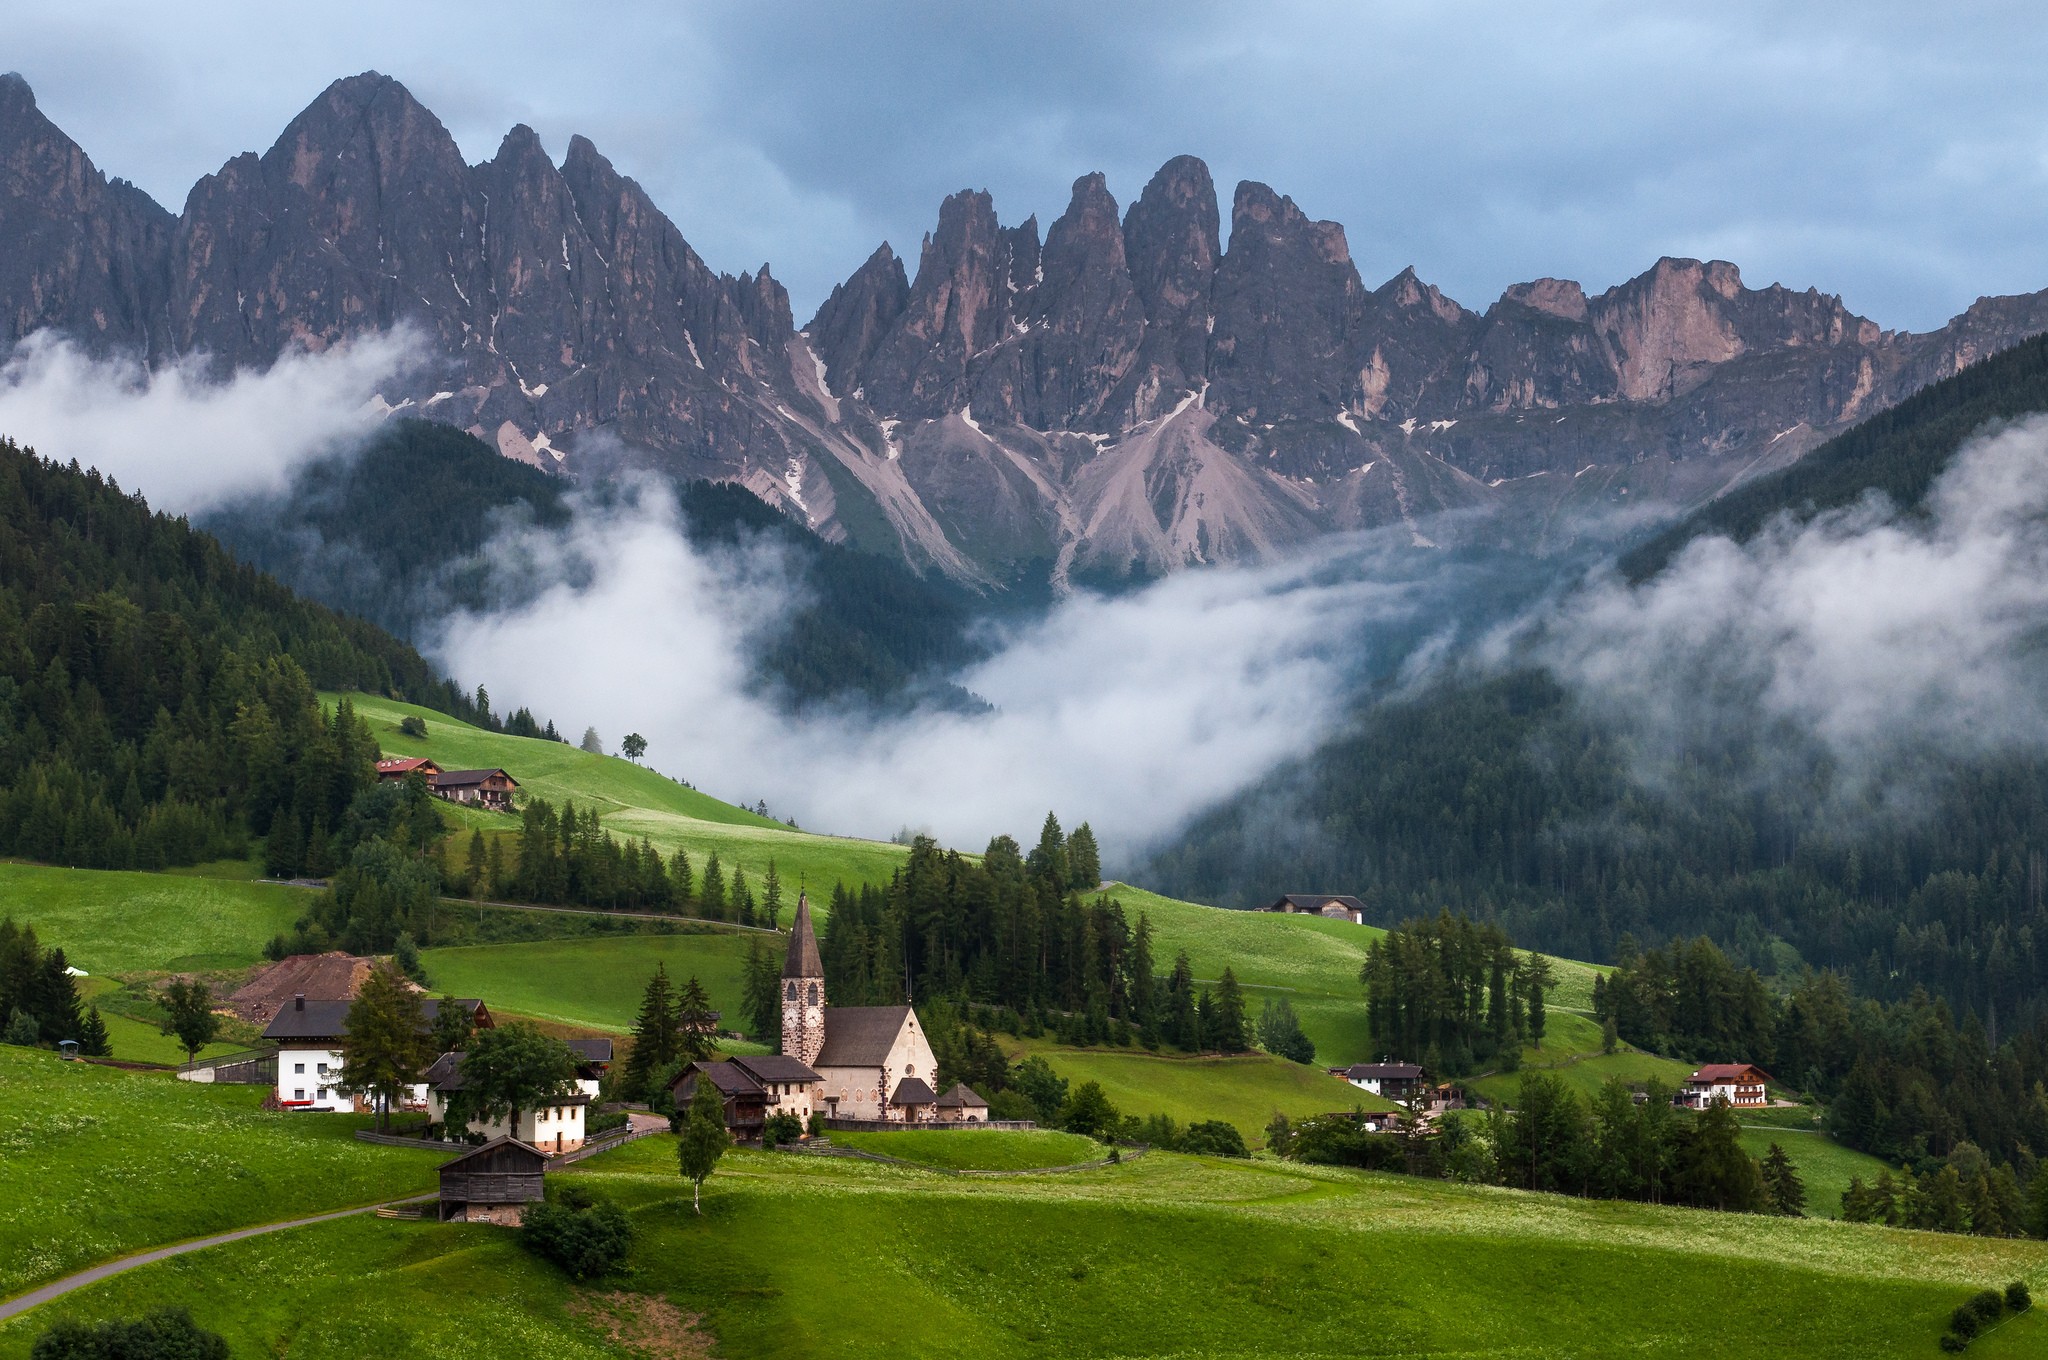 General 2048x1360 nature landscape mountains clouds trees Italy Dolomites mist forest church hills house field Santa Magdalena